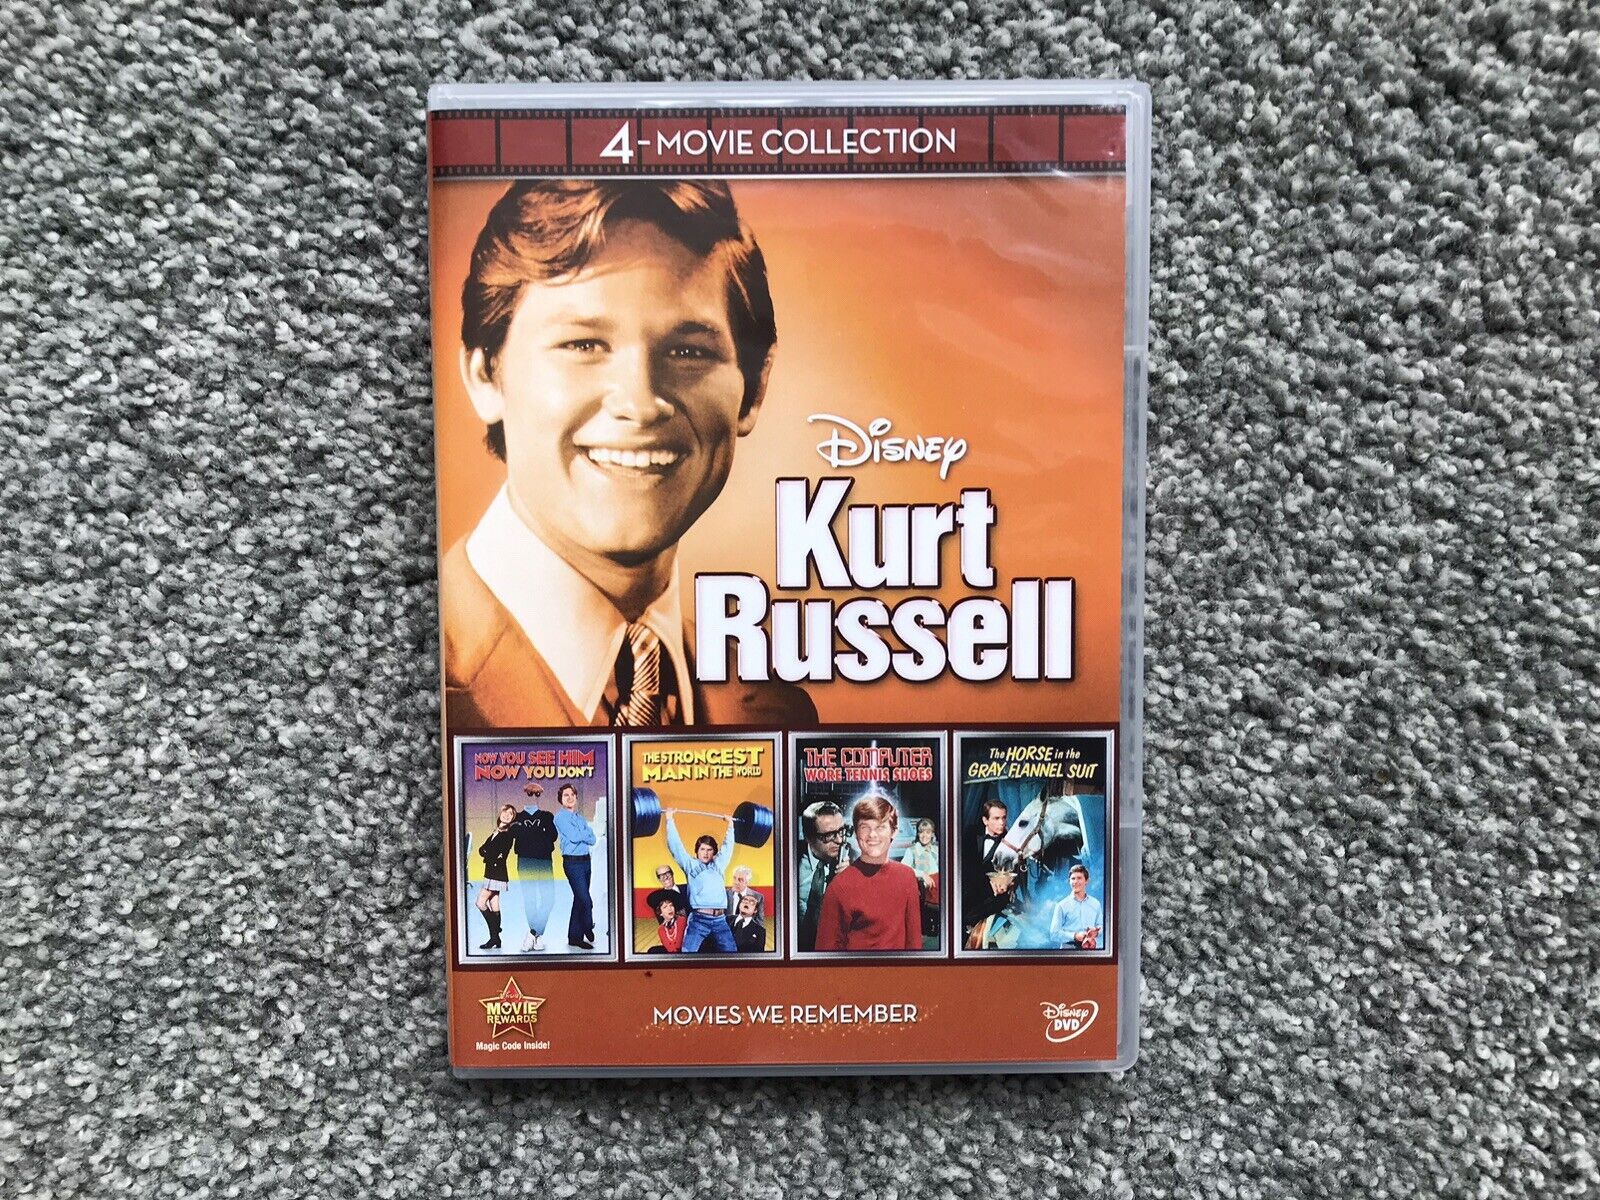 Kurt Russell 4-Movie Collection 4 DVDS Vintage Disney Movies VG Condition.